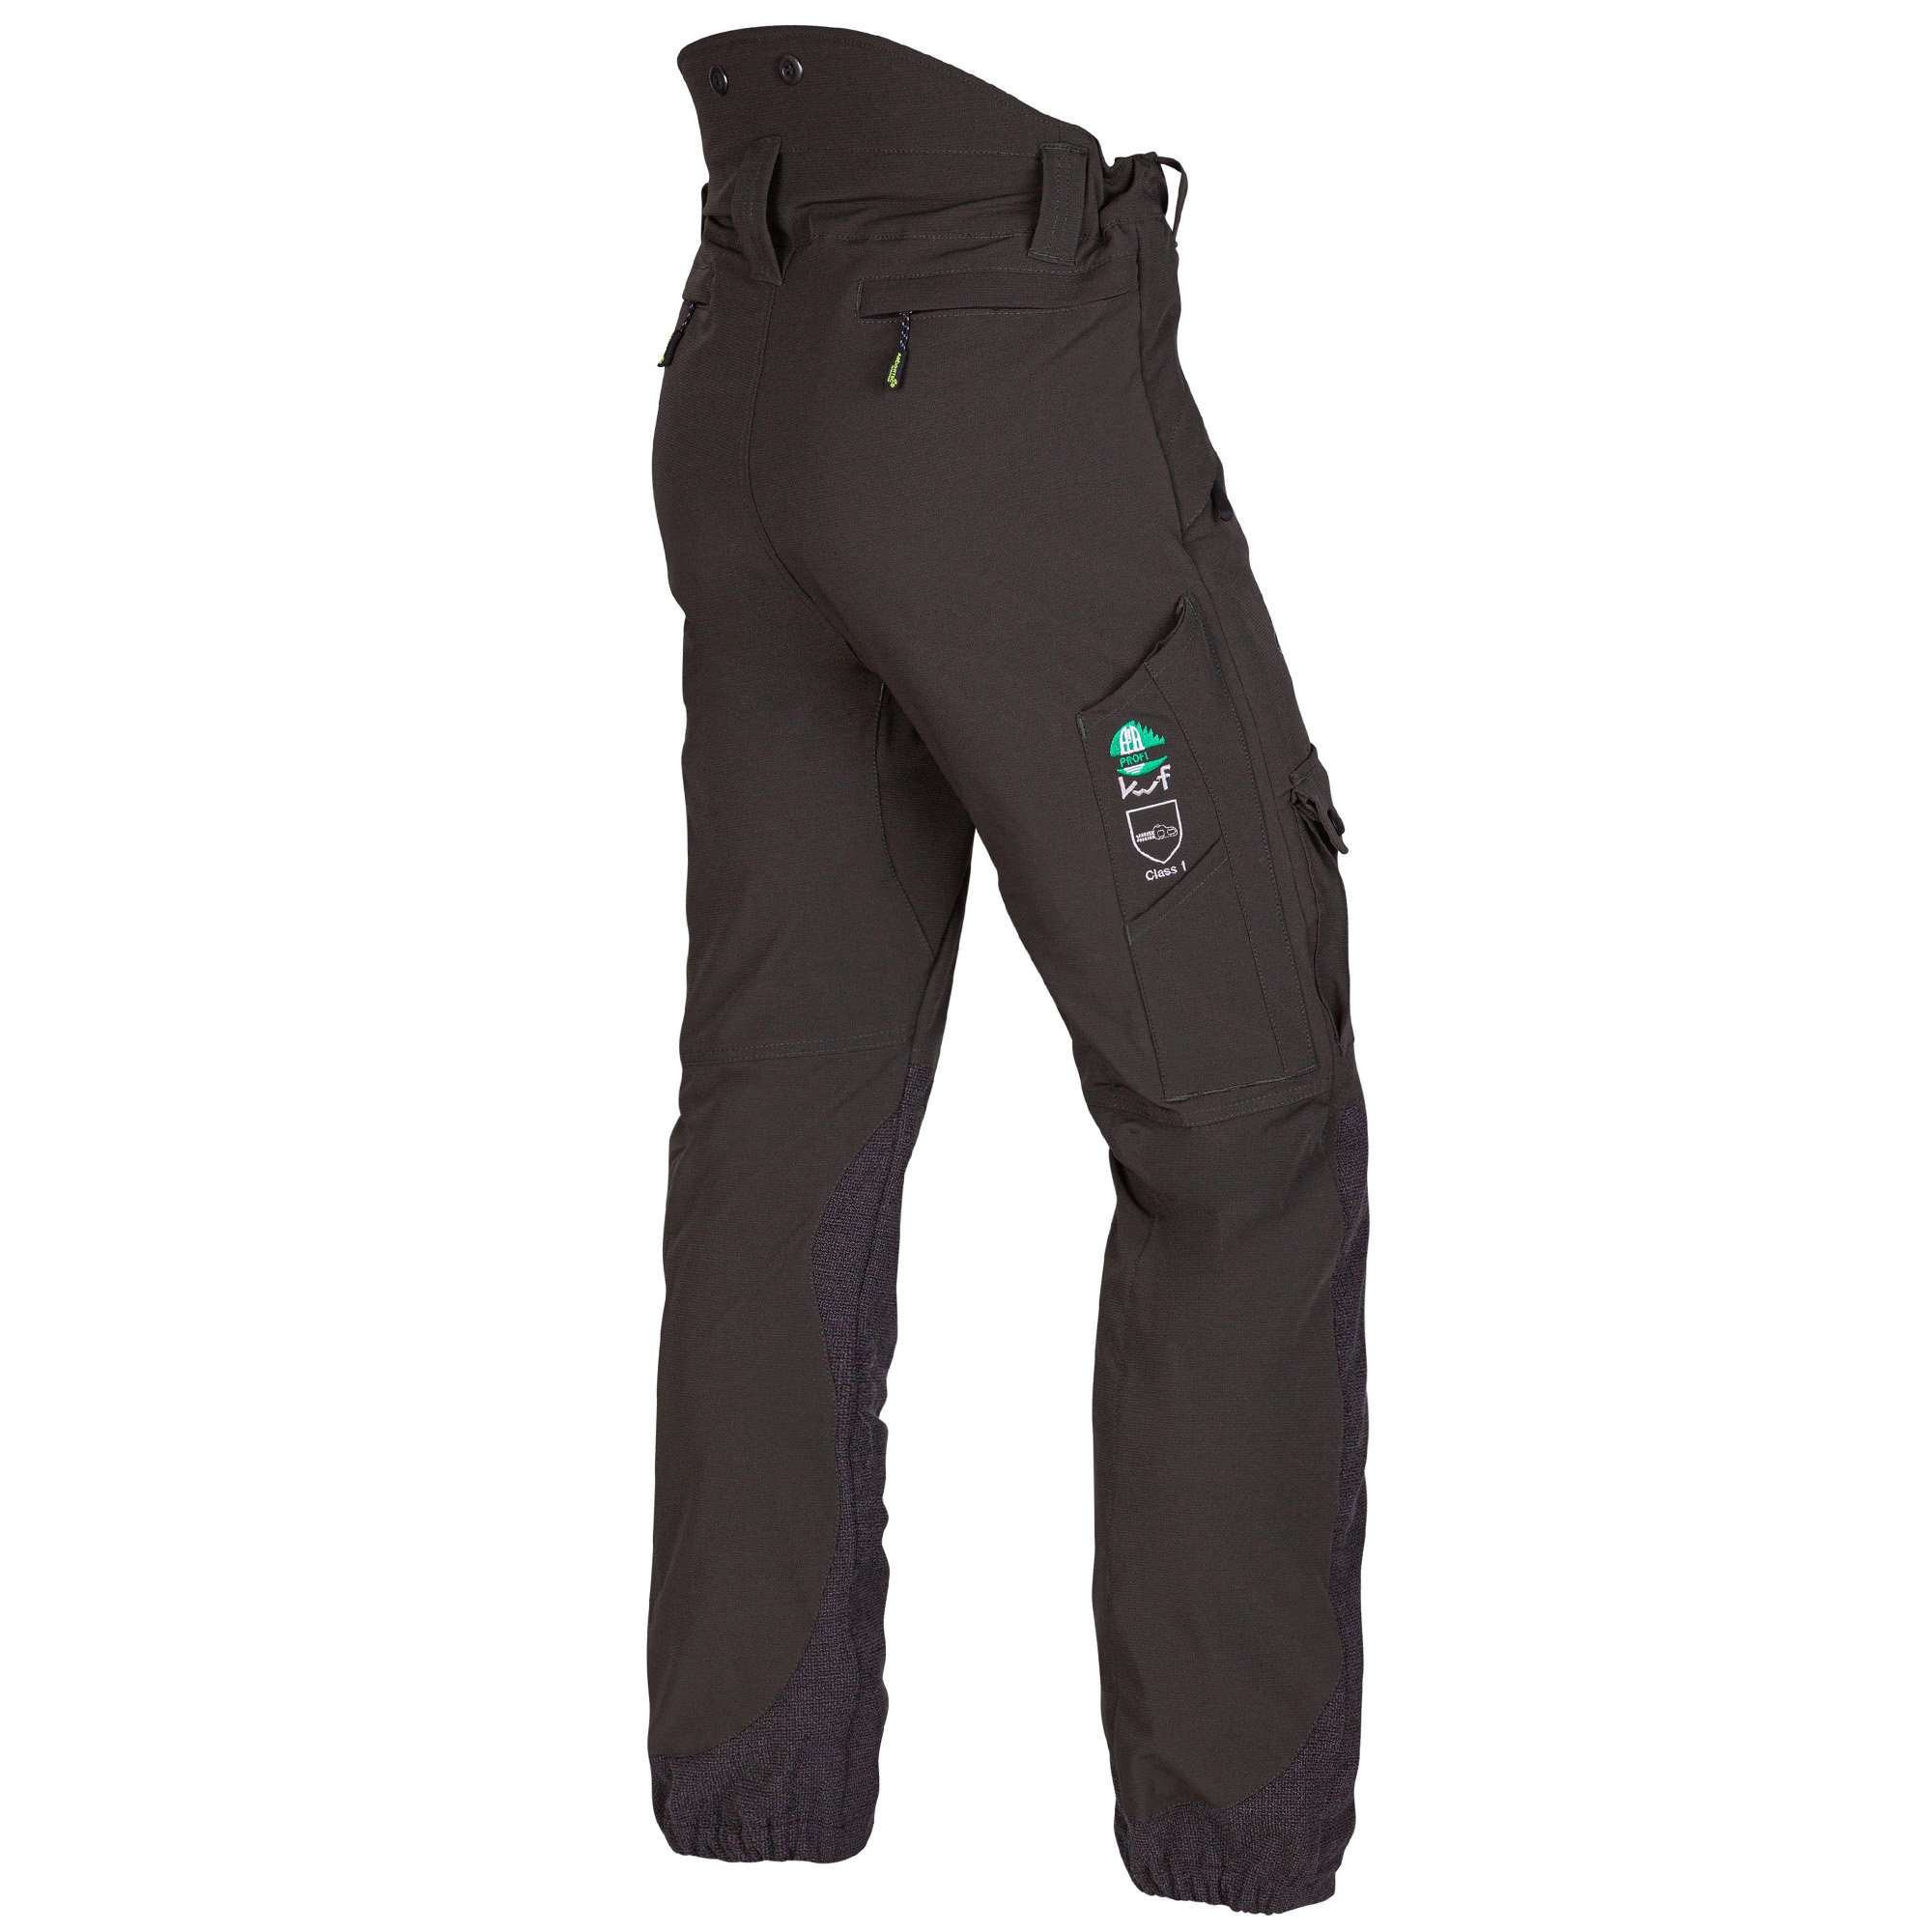 AT4050 Breatheflex Type C Class 1 Chainsaw Trousers - Olive - Arbortec Forestwear